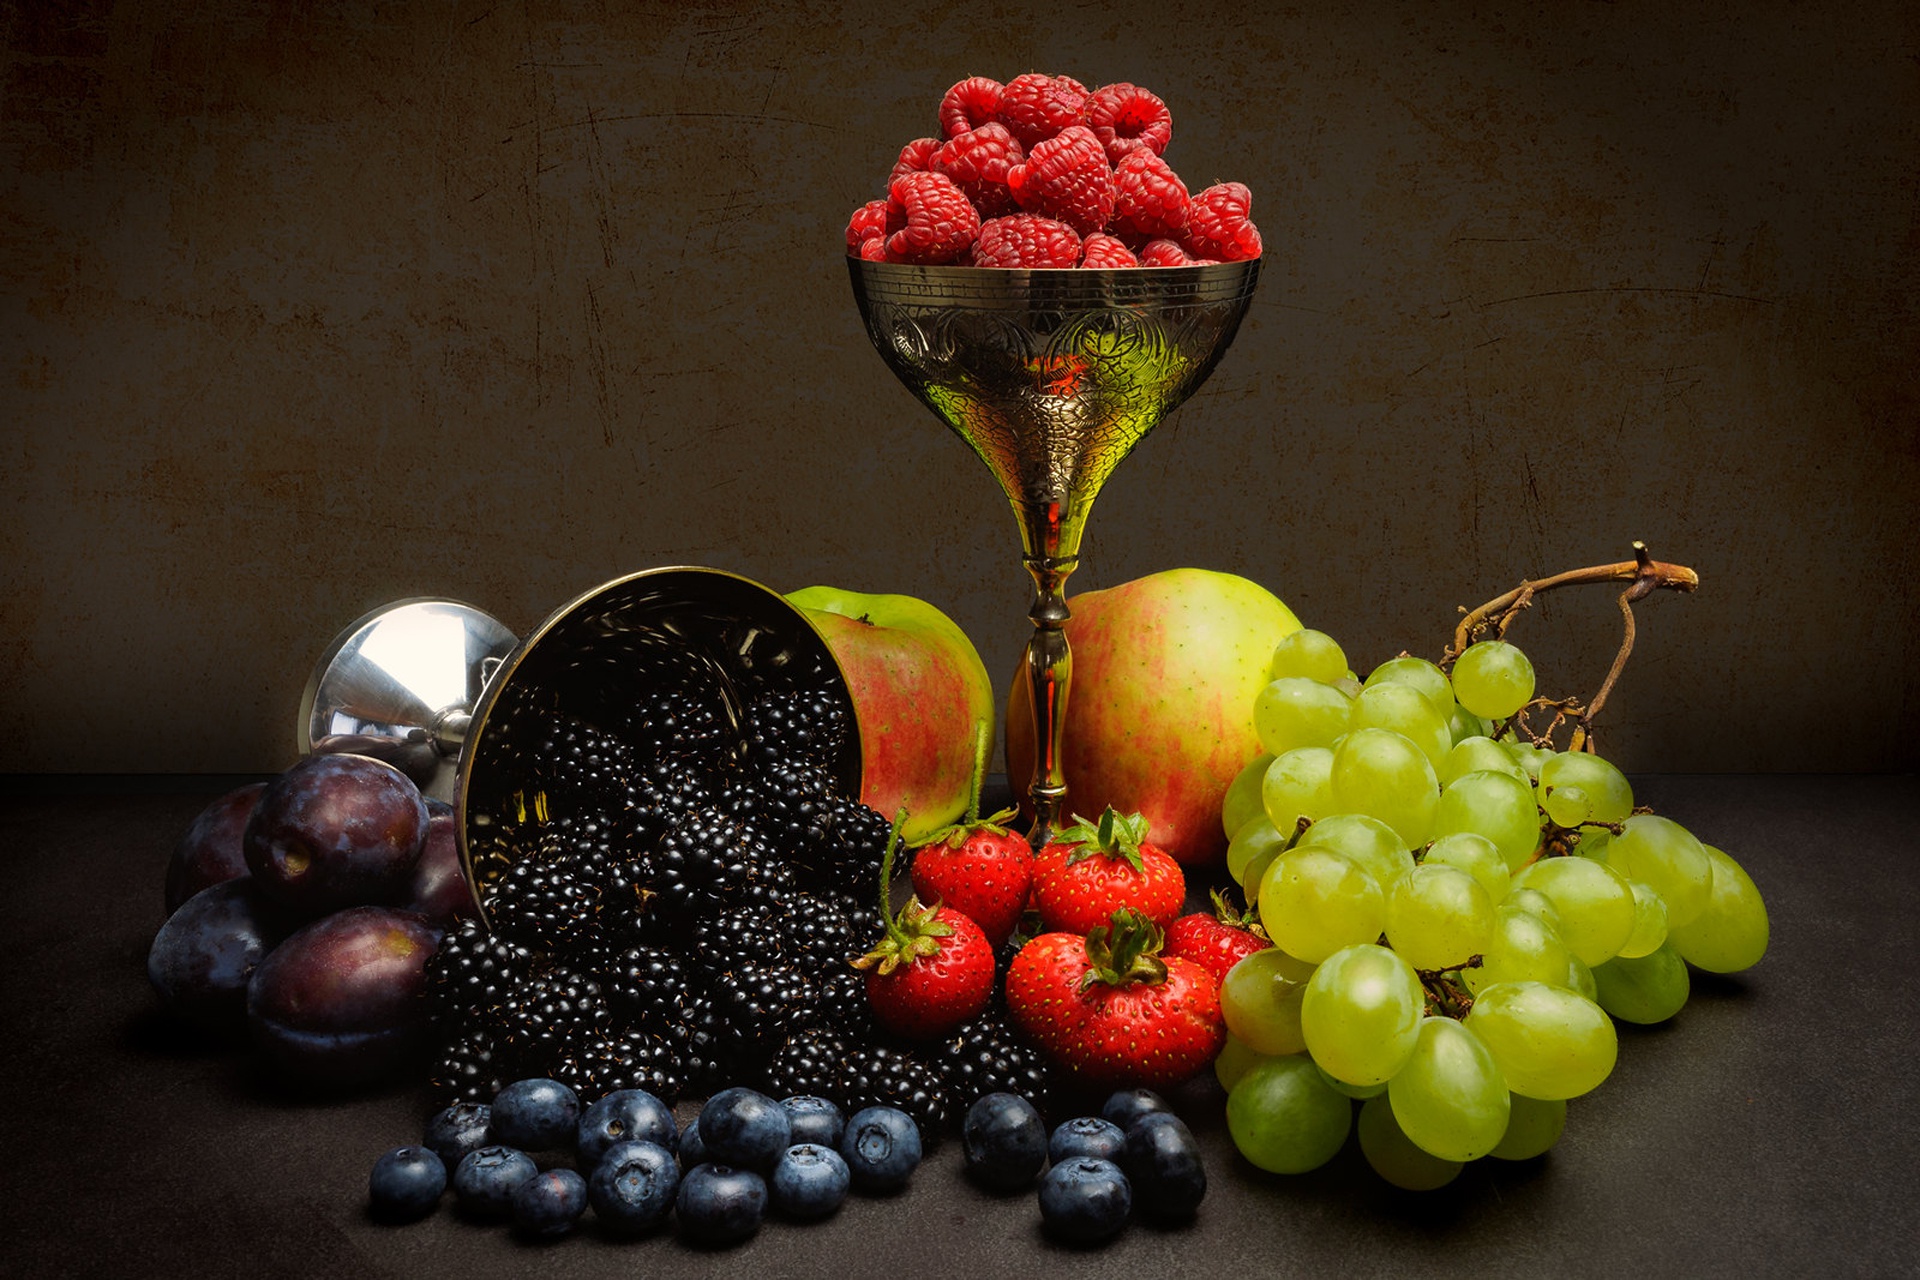 General 1920x1280 fruit food berries still life raspberries blackberries blueberries strawberries grapes apples simple background closeup fig